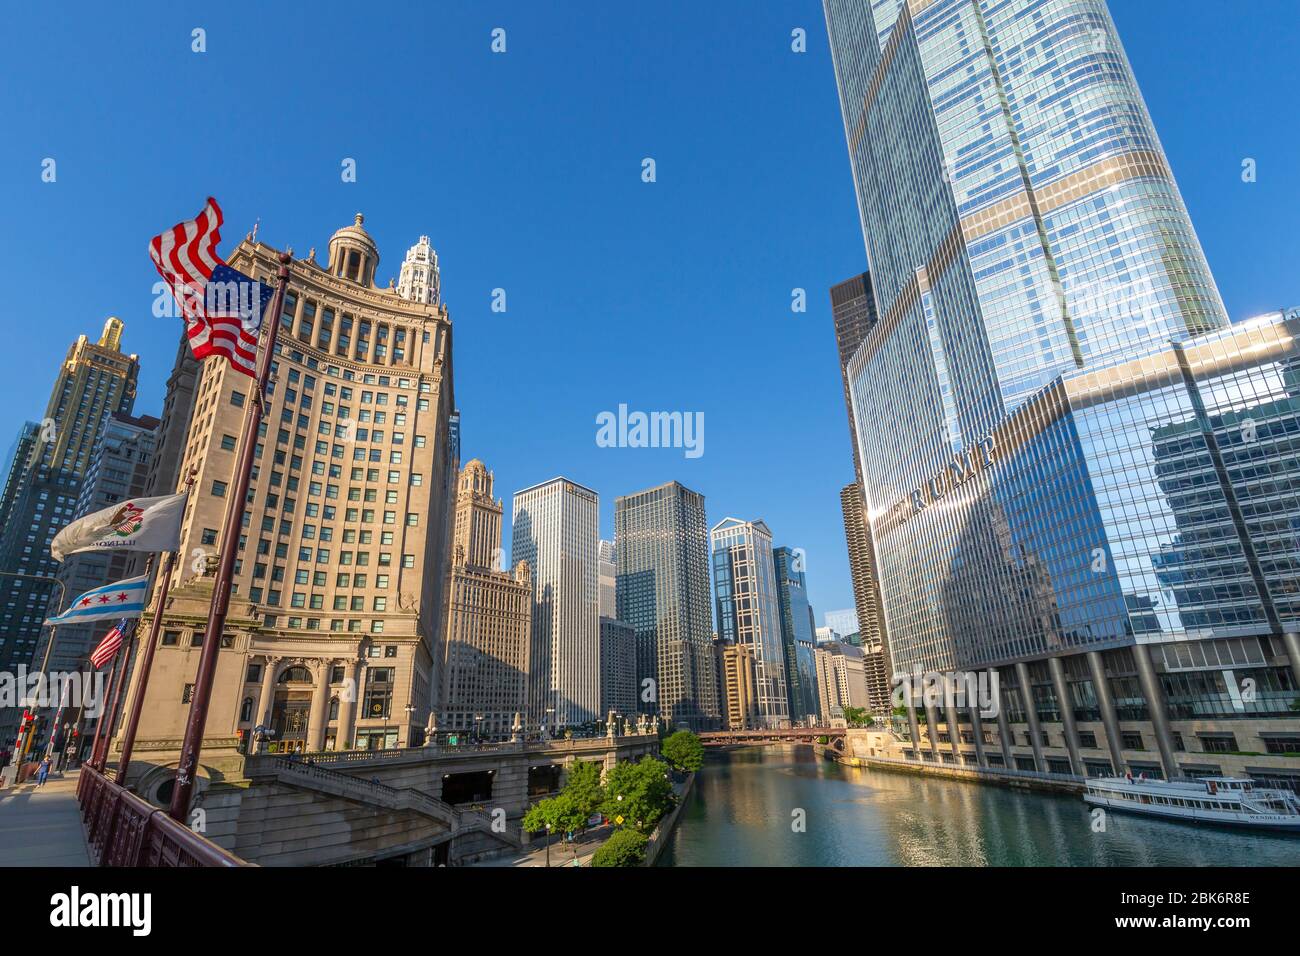 Early morning view of the Chicago River from DuSable Bridge, Chicago, Illinois, United States of America, North America Stock Photo